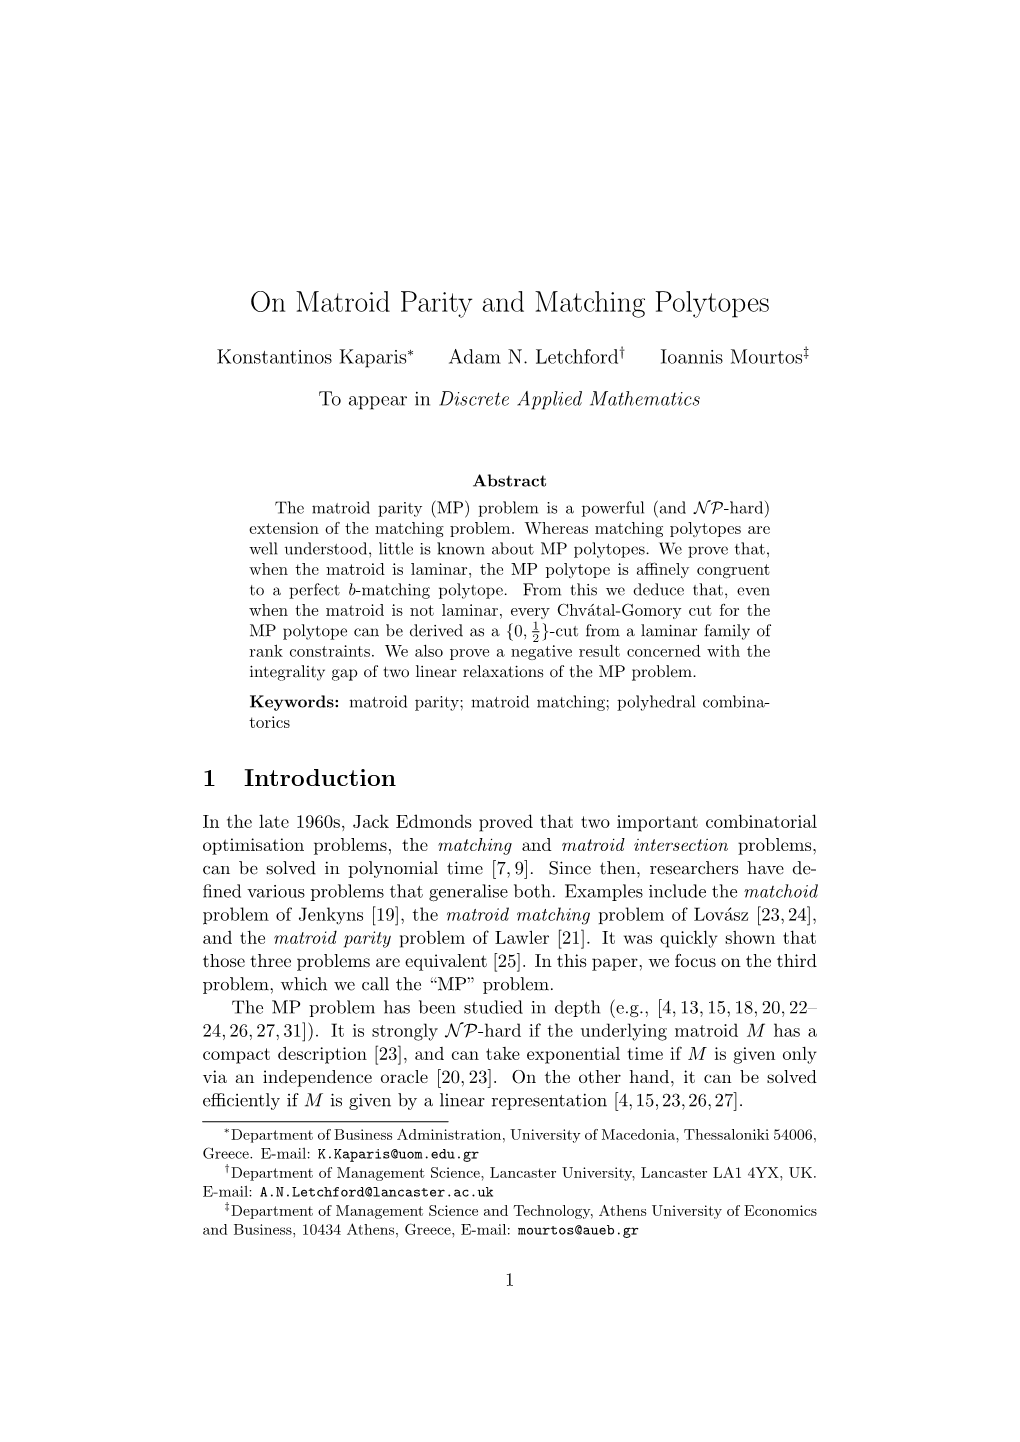 On Matroid Parity and Matching Polytopes